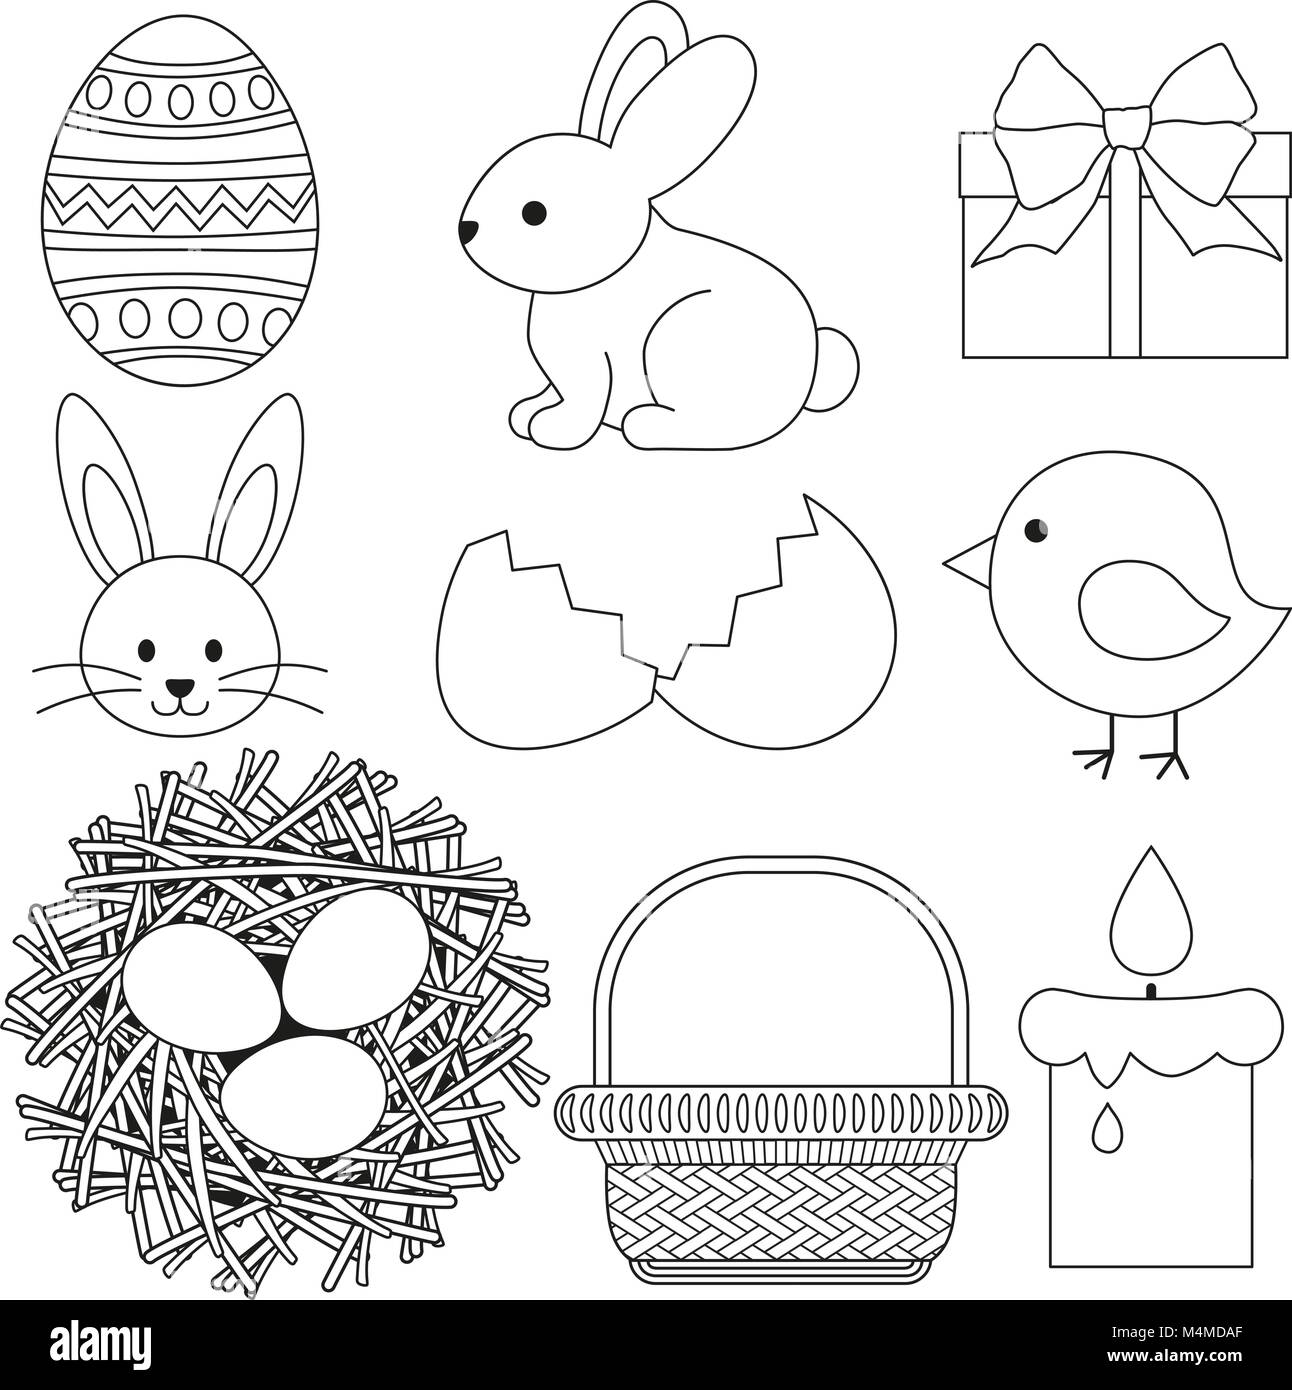 Line art black and white easter icon set 9 elements. Stock Vector